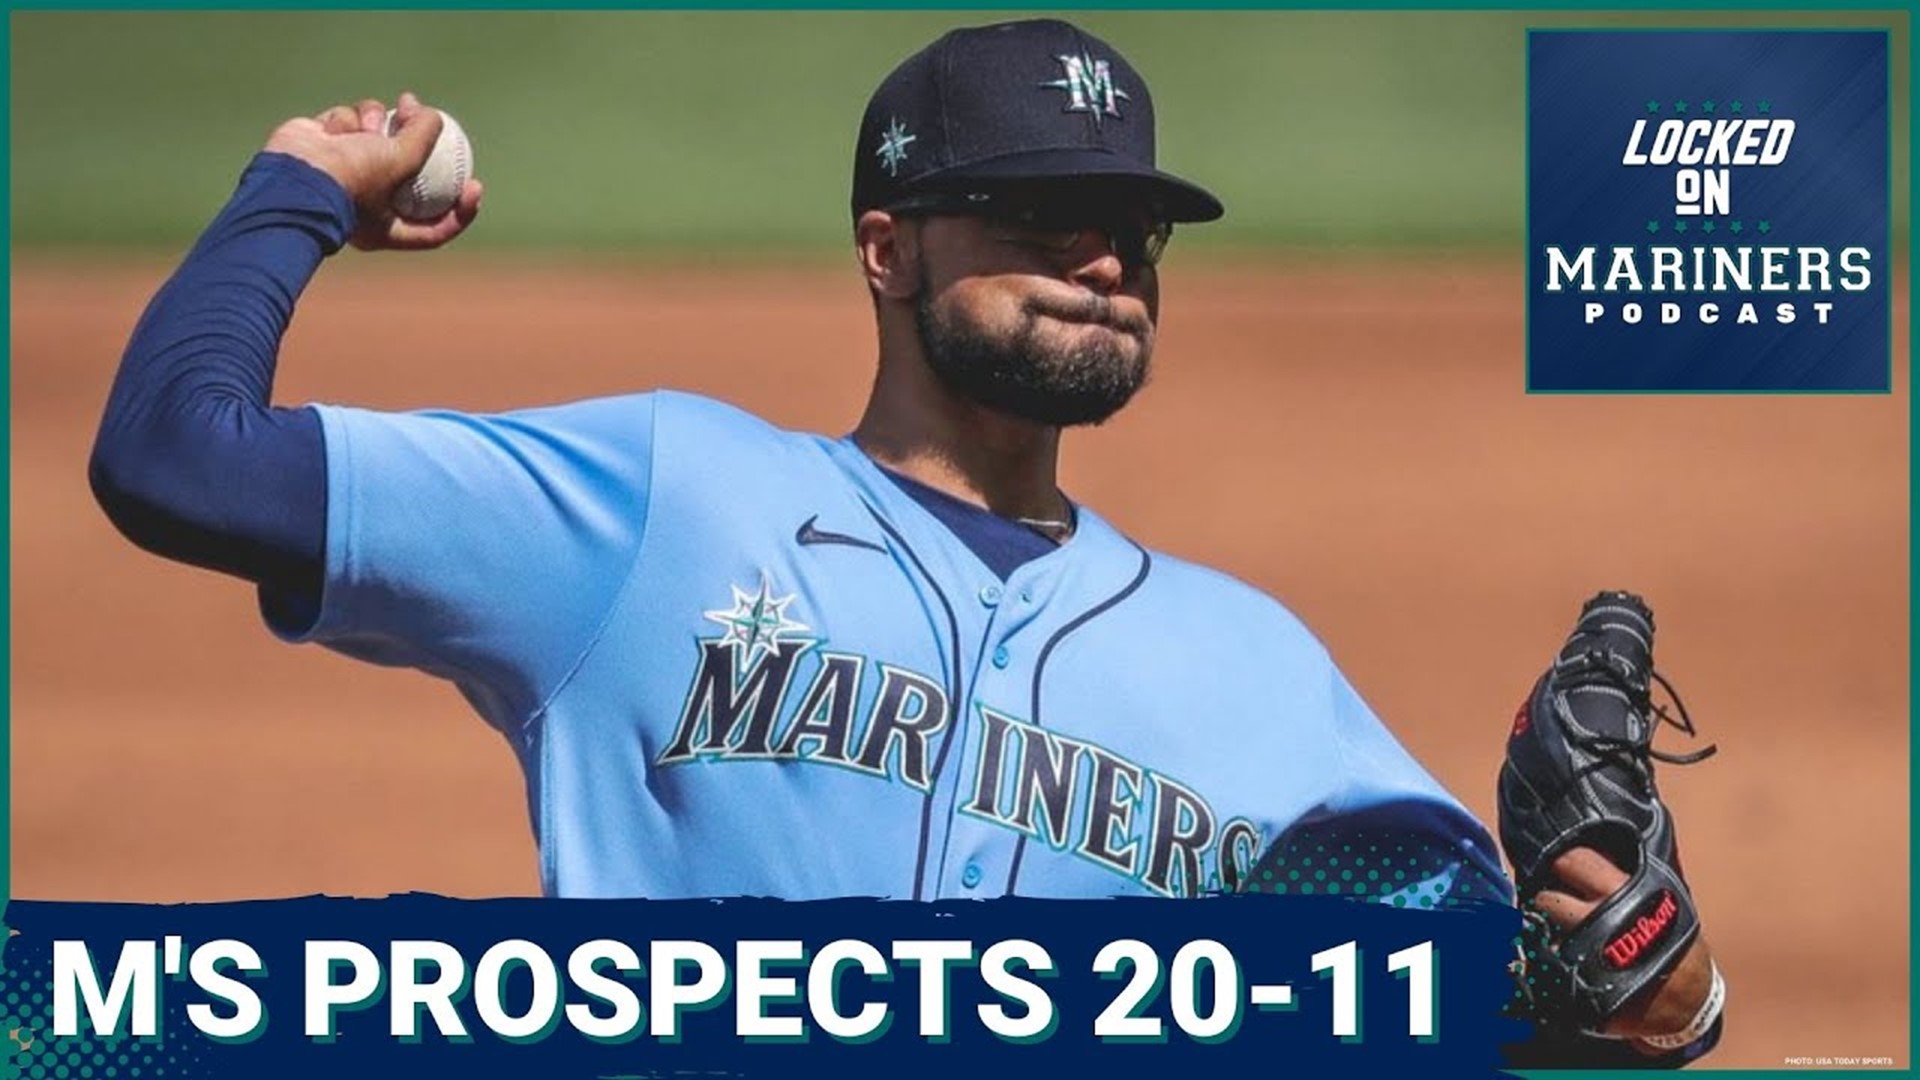 On today's episode, Colby and Ty unveil their 11-20th best prospect in the Mariners system.